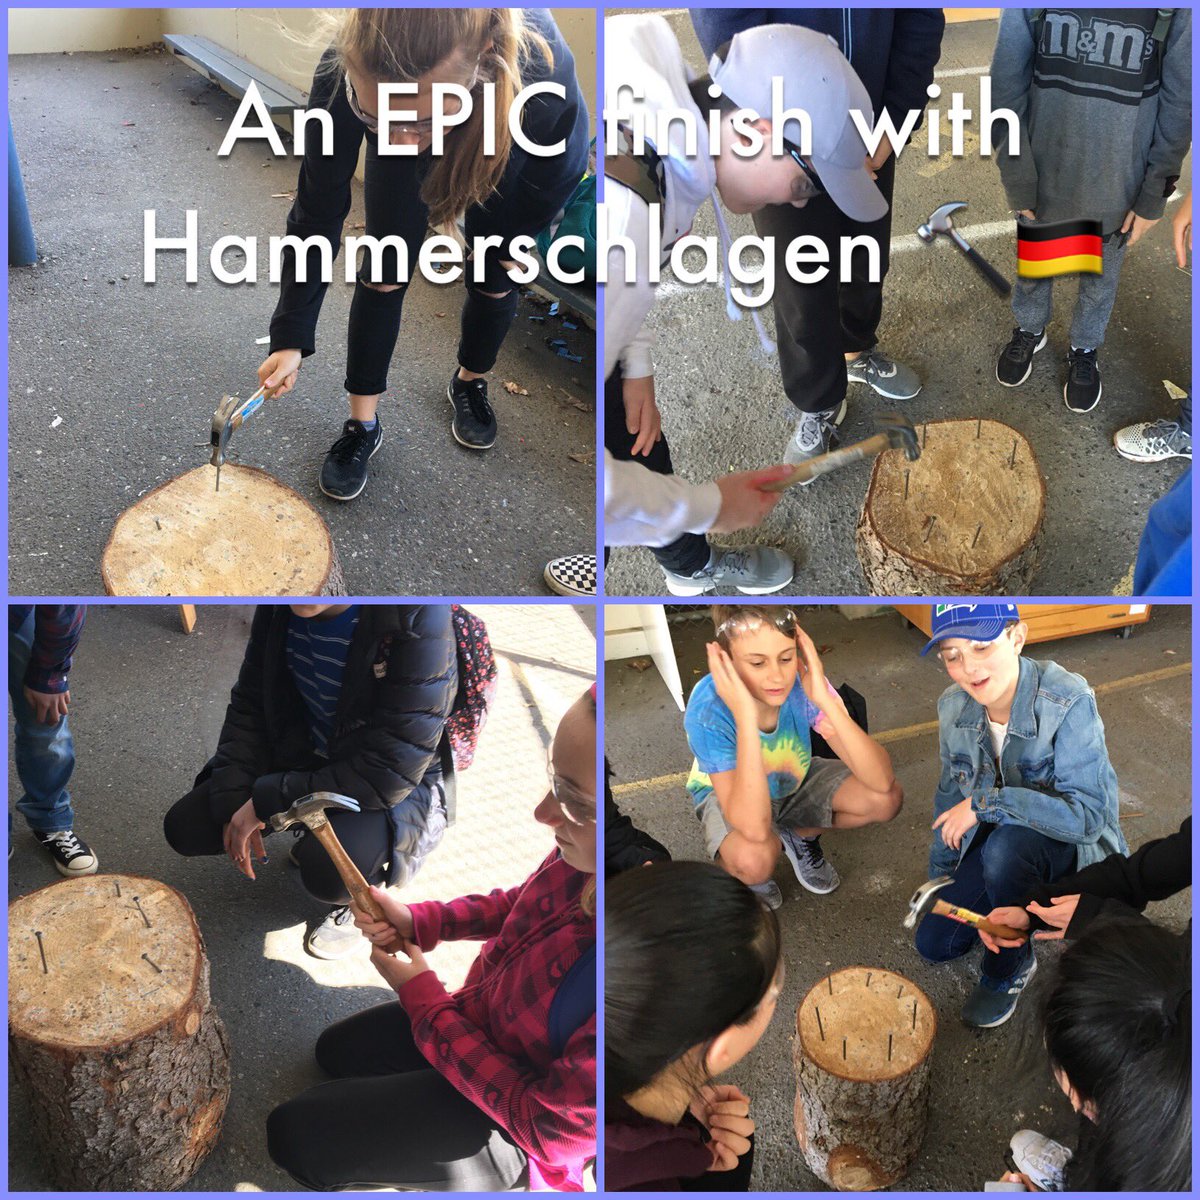 Making🔨🧰. Collaboration. Problem Solving. AND A LOT of sanding & hammering🔨🐦🏠w/ @MsHornDiv10 @crescentpark36 Loads of fun too! Kindness Project Part 2 ✔️ 50+ birdhouses @ScottSmithSD36 #sd36learn #sd36adst thx 2 all our parent helpers ☕️🤗